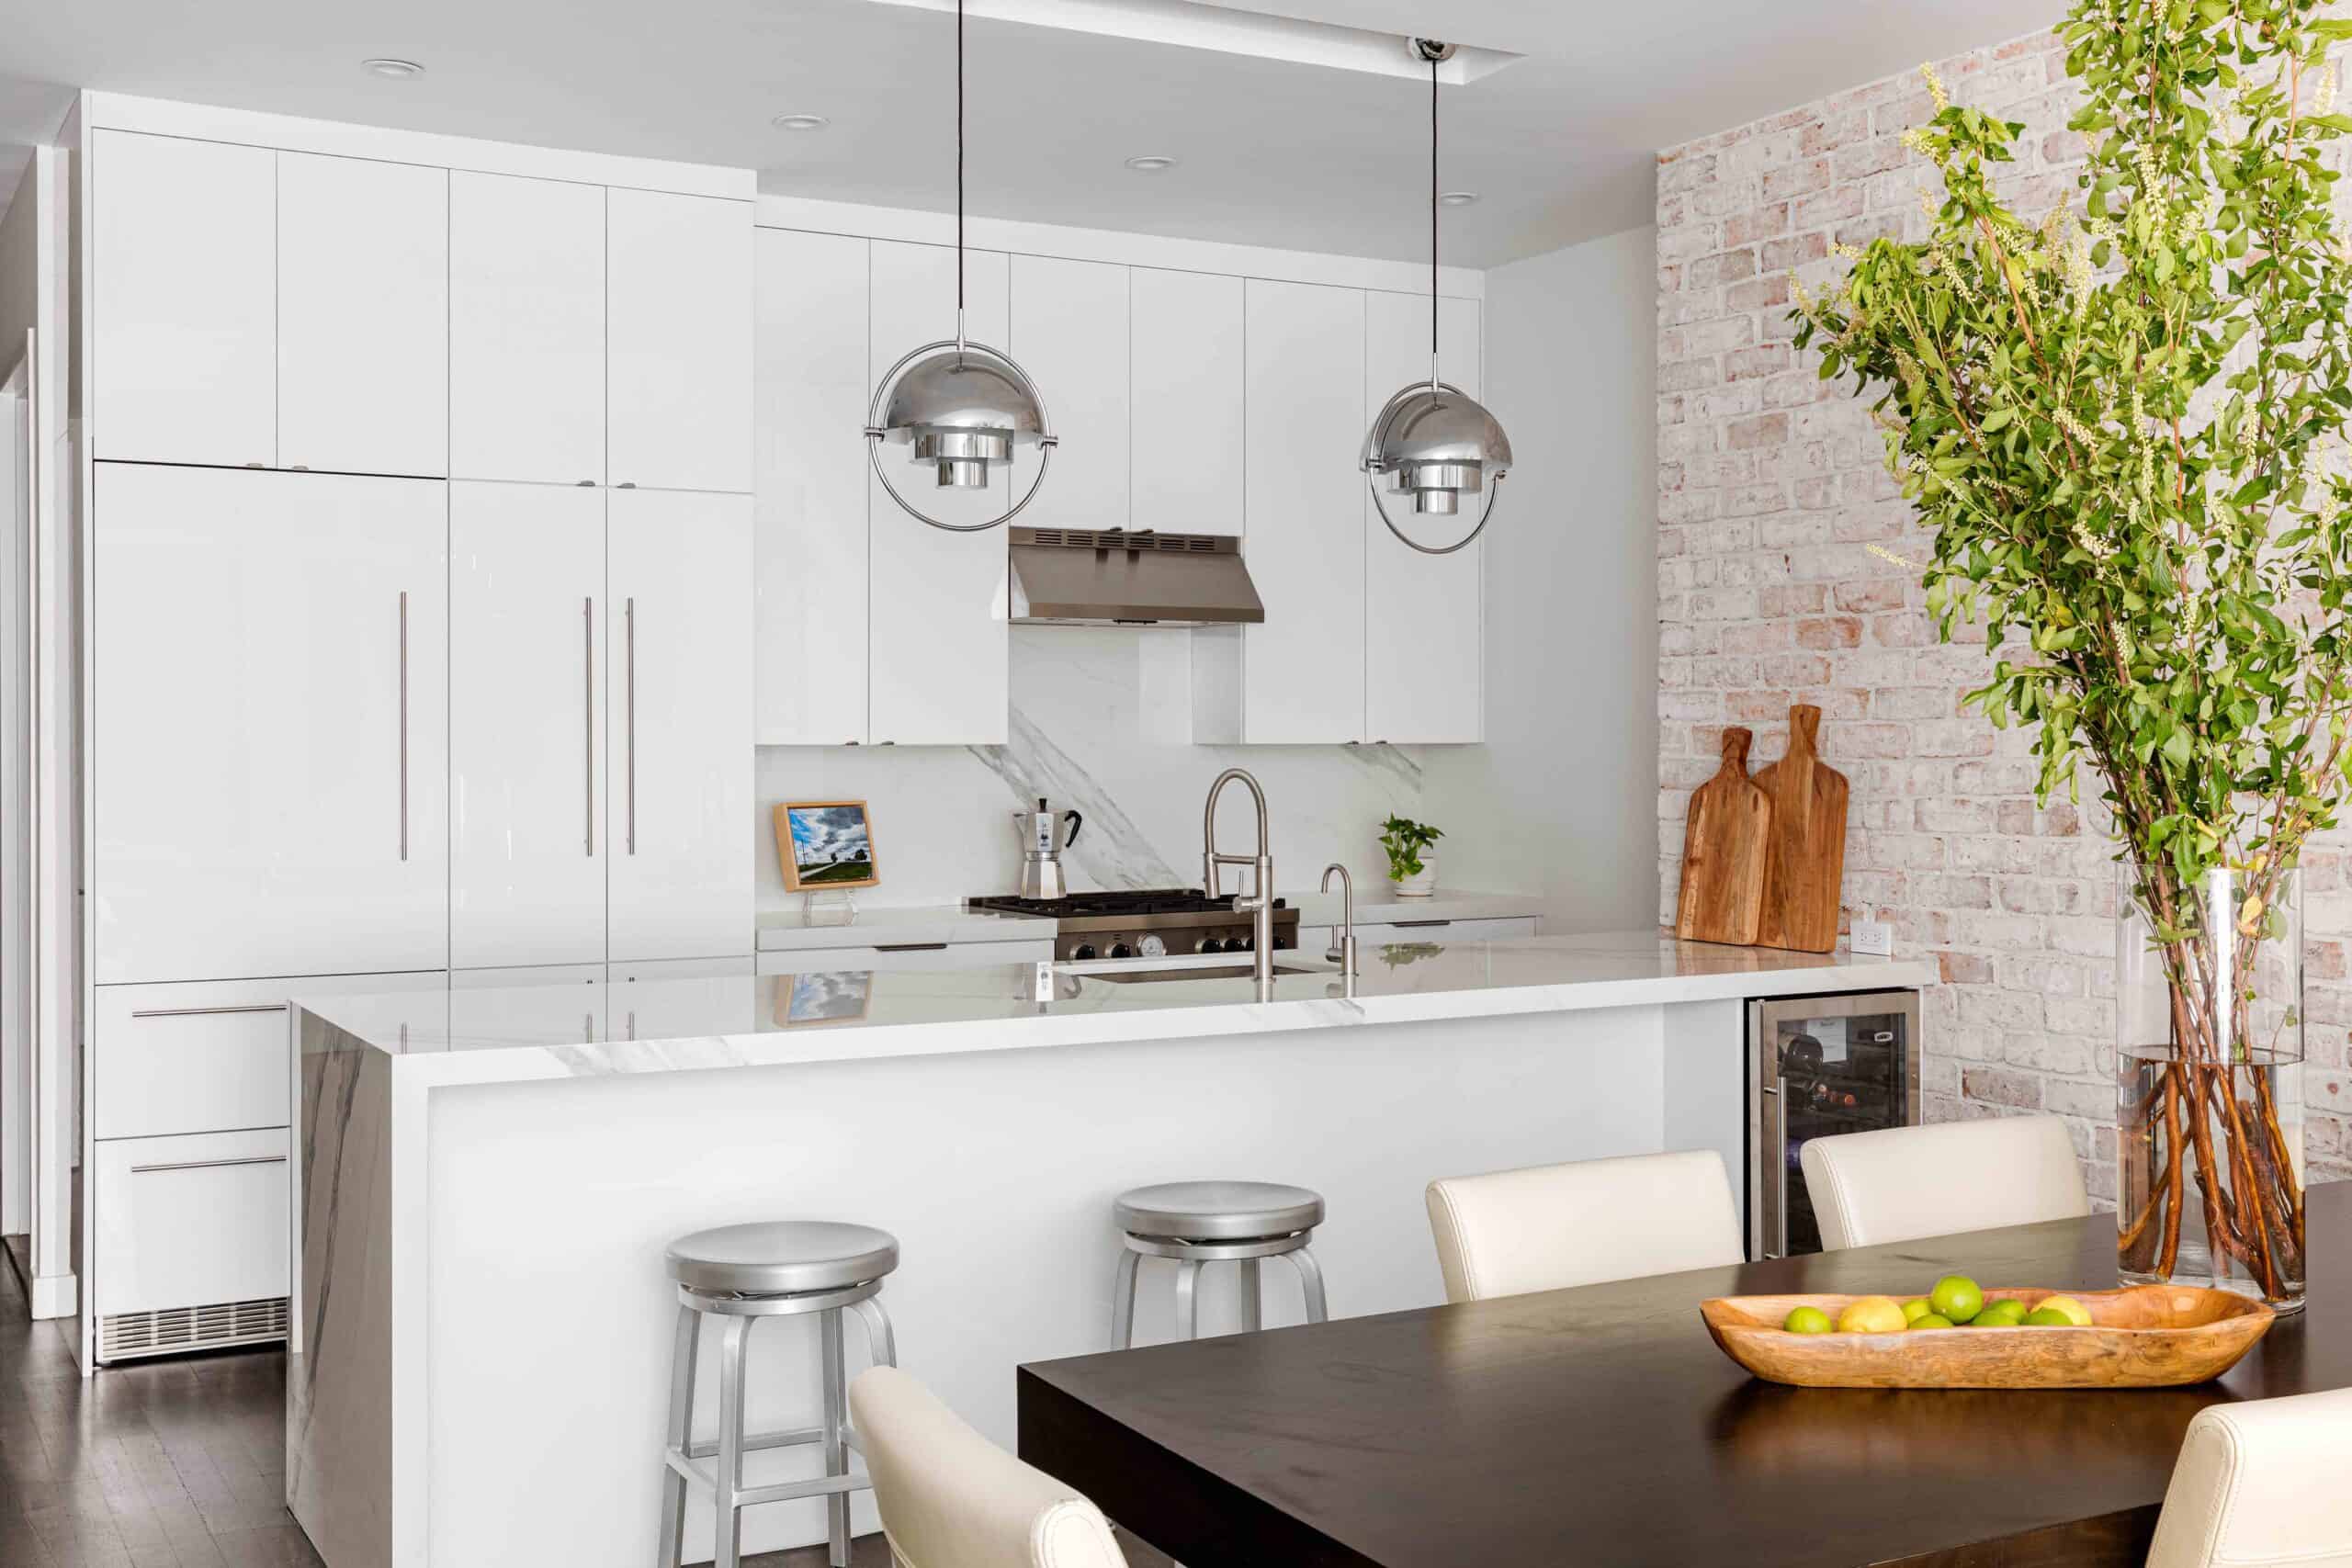 A Crisp And Bright Kitchen Renovation That is Super Kid-Friendly From One Of Our Very Own EHD Insiders